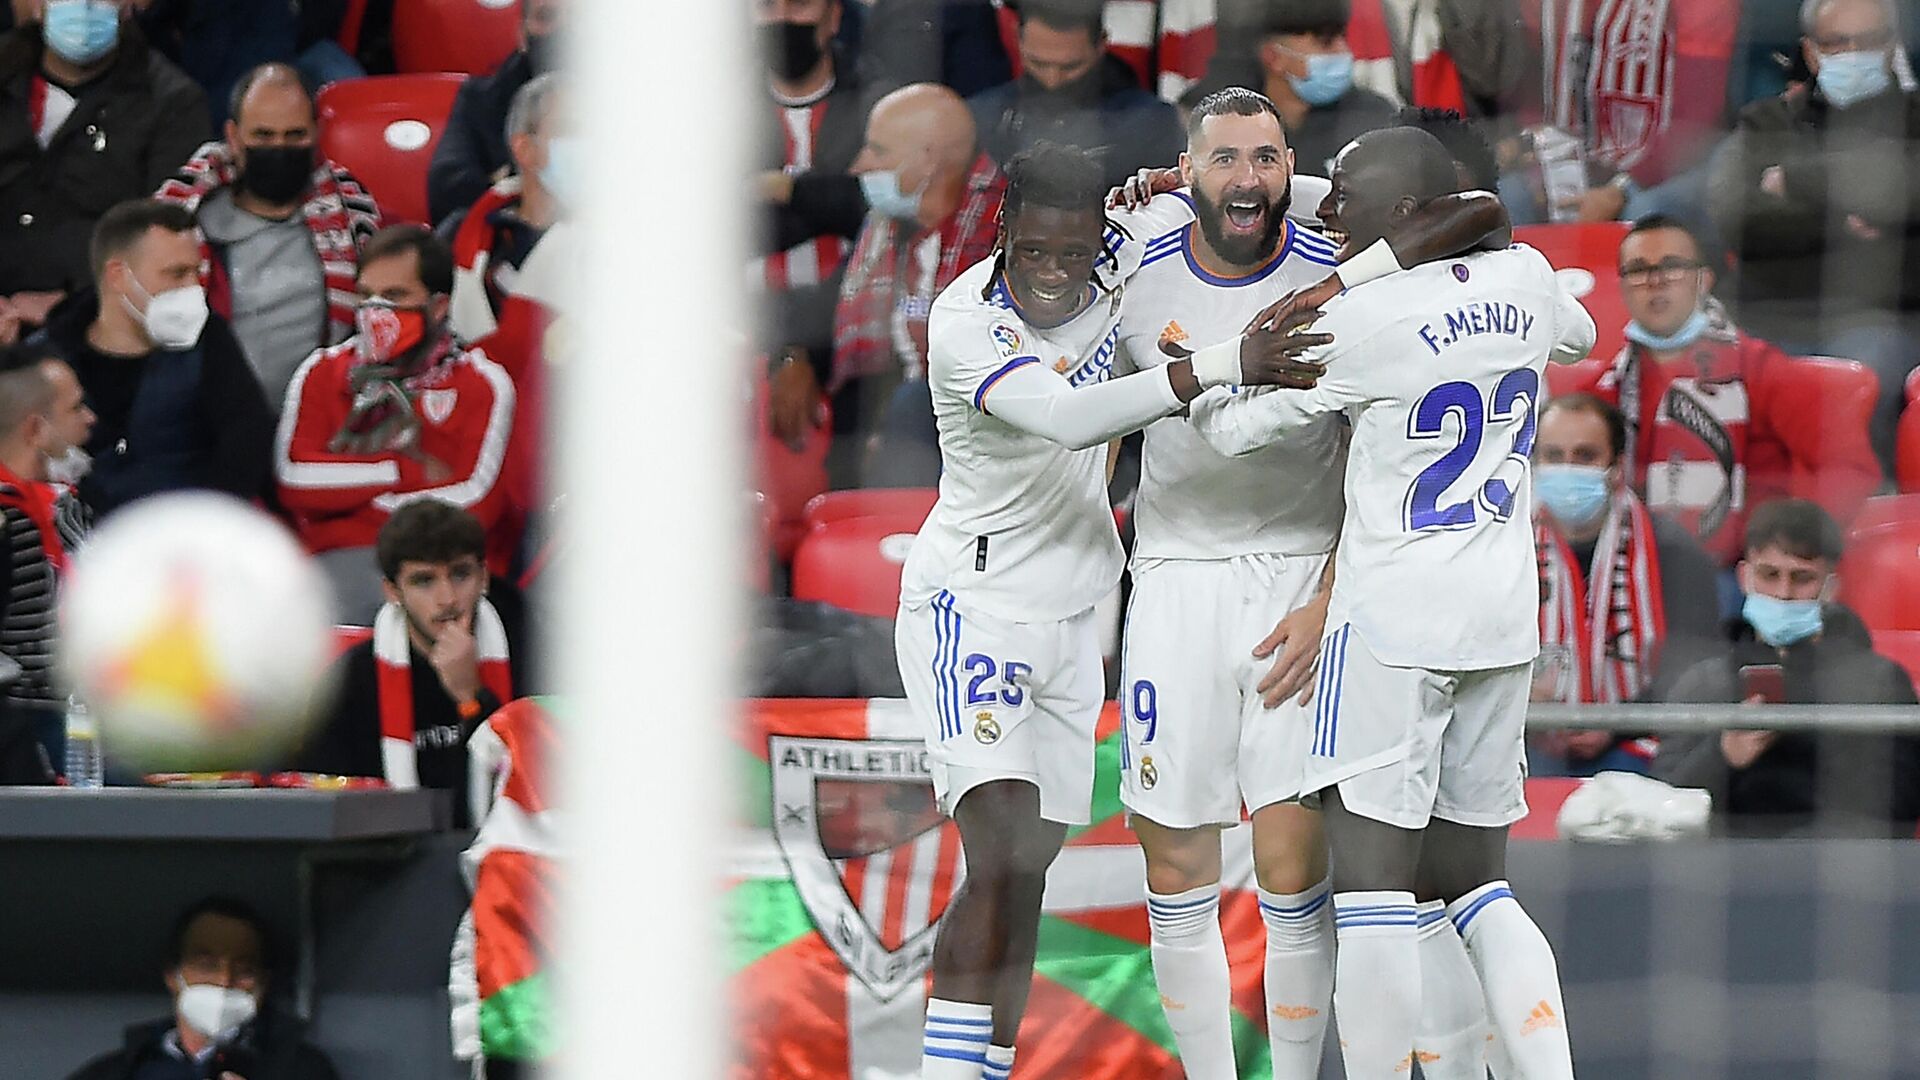 Real Madrid's French forward Karim Benzema (C) celebrates with Real Madrid's French midfielder Eduardo Camavinga (L) and Real Madrid's French defender Ferland Mendy after scoring his team's first goal during the Spanish league football match between Athletic Club Bilbao and Real Madrid CF at the San Mames stadium in Bilbao on December 22, 2021. (Photo by ANDER GILLENEA / AFP) - РИА Новости, 1920, 23.12.2021